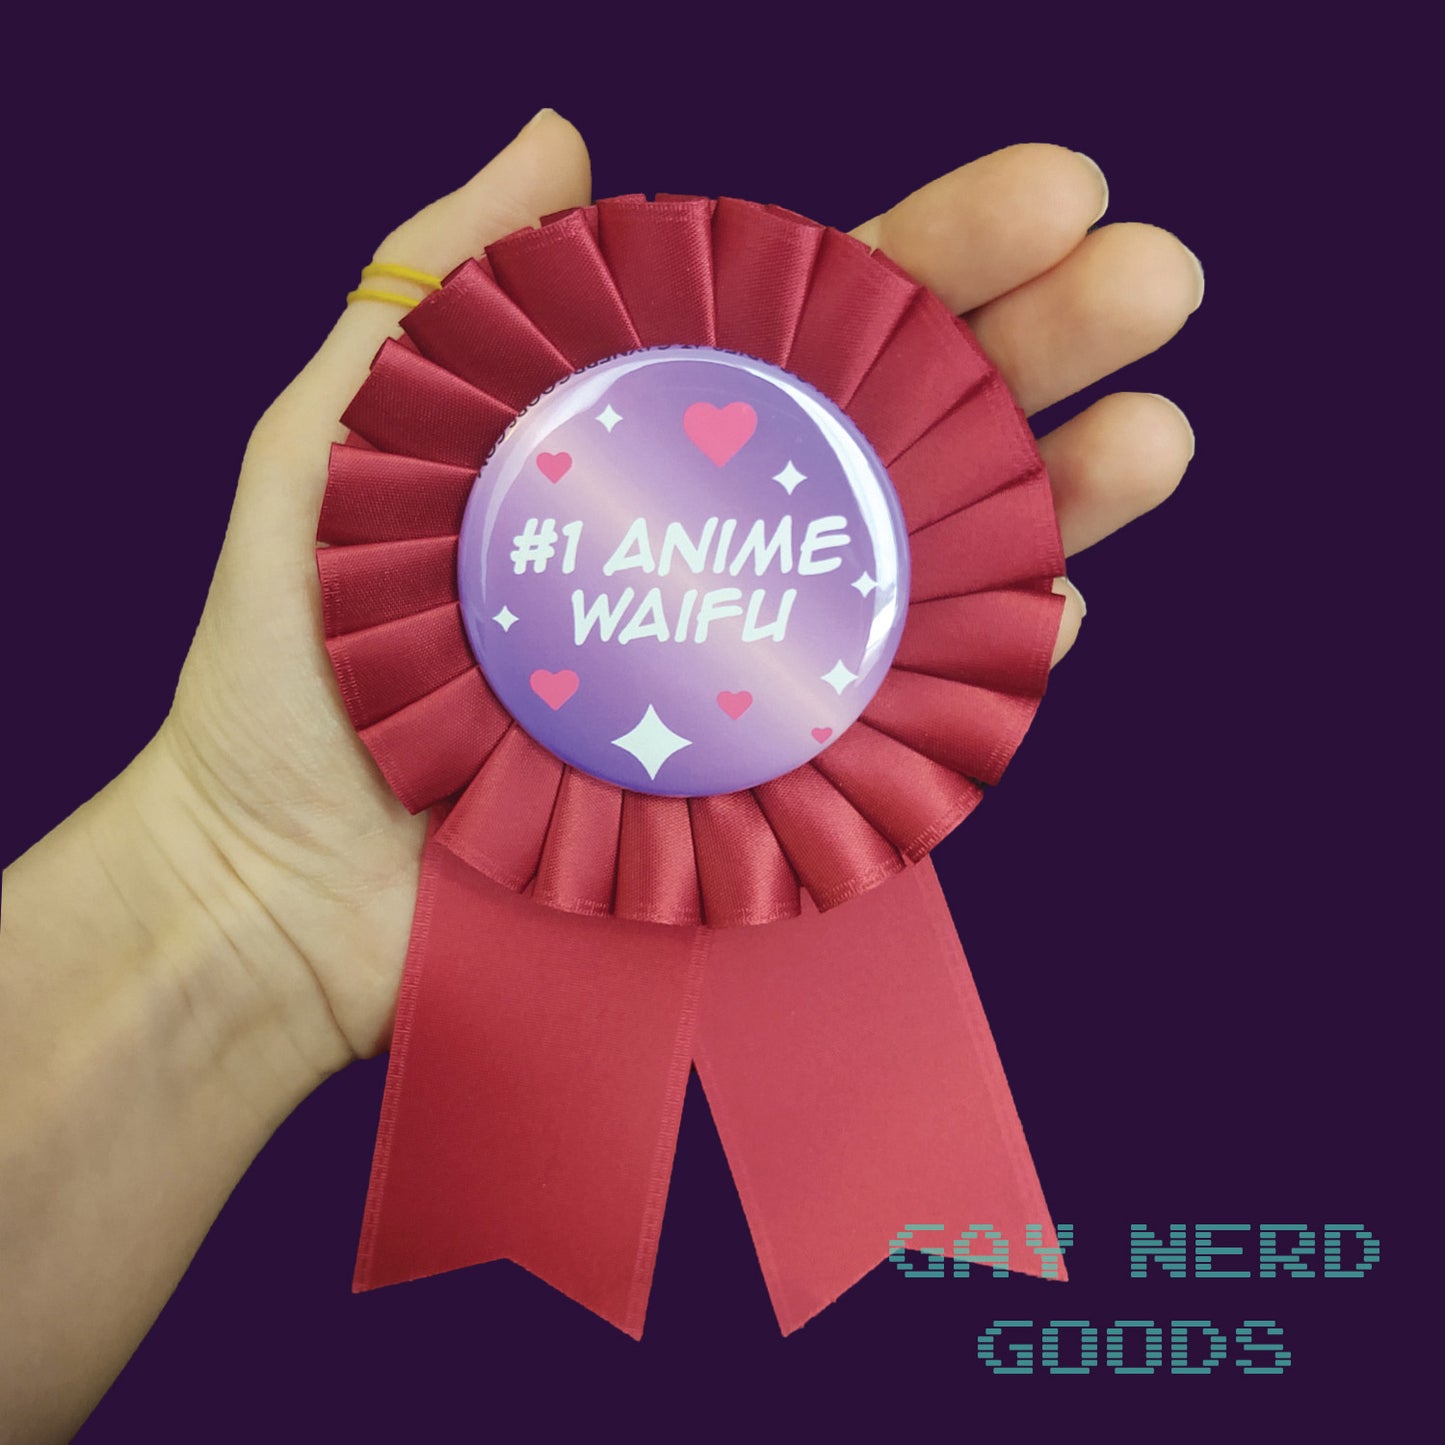 hand holding the red #1 anime waifu award ribbon against a purple background